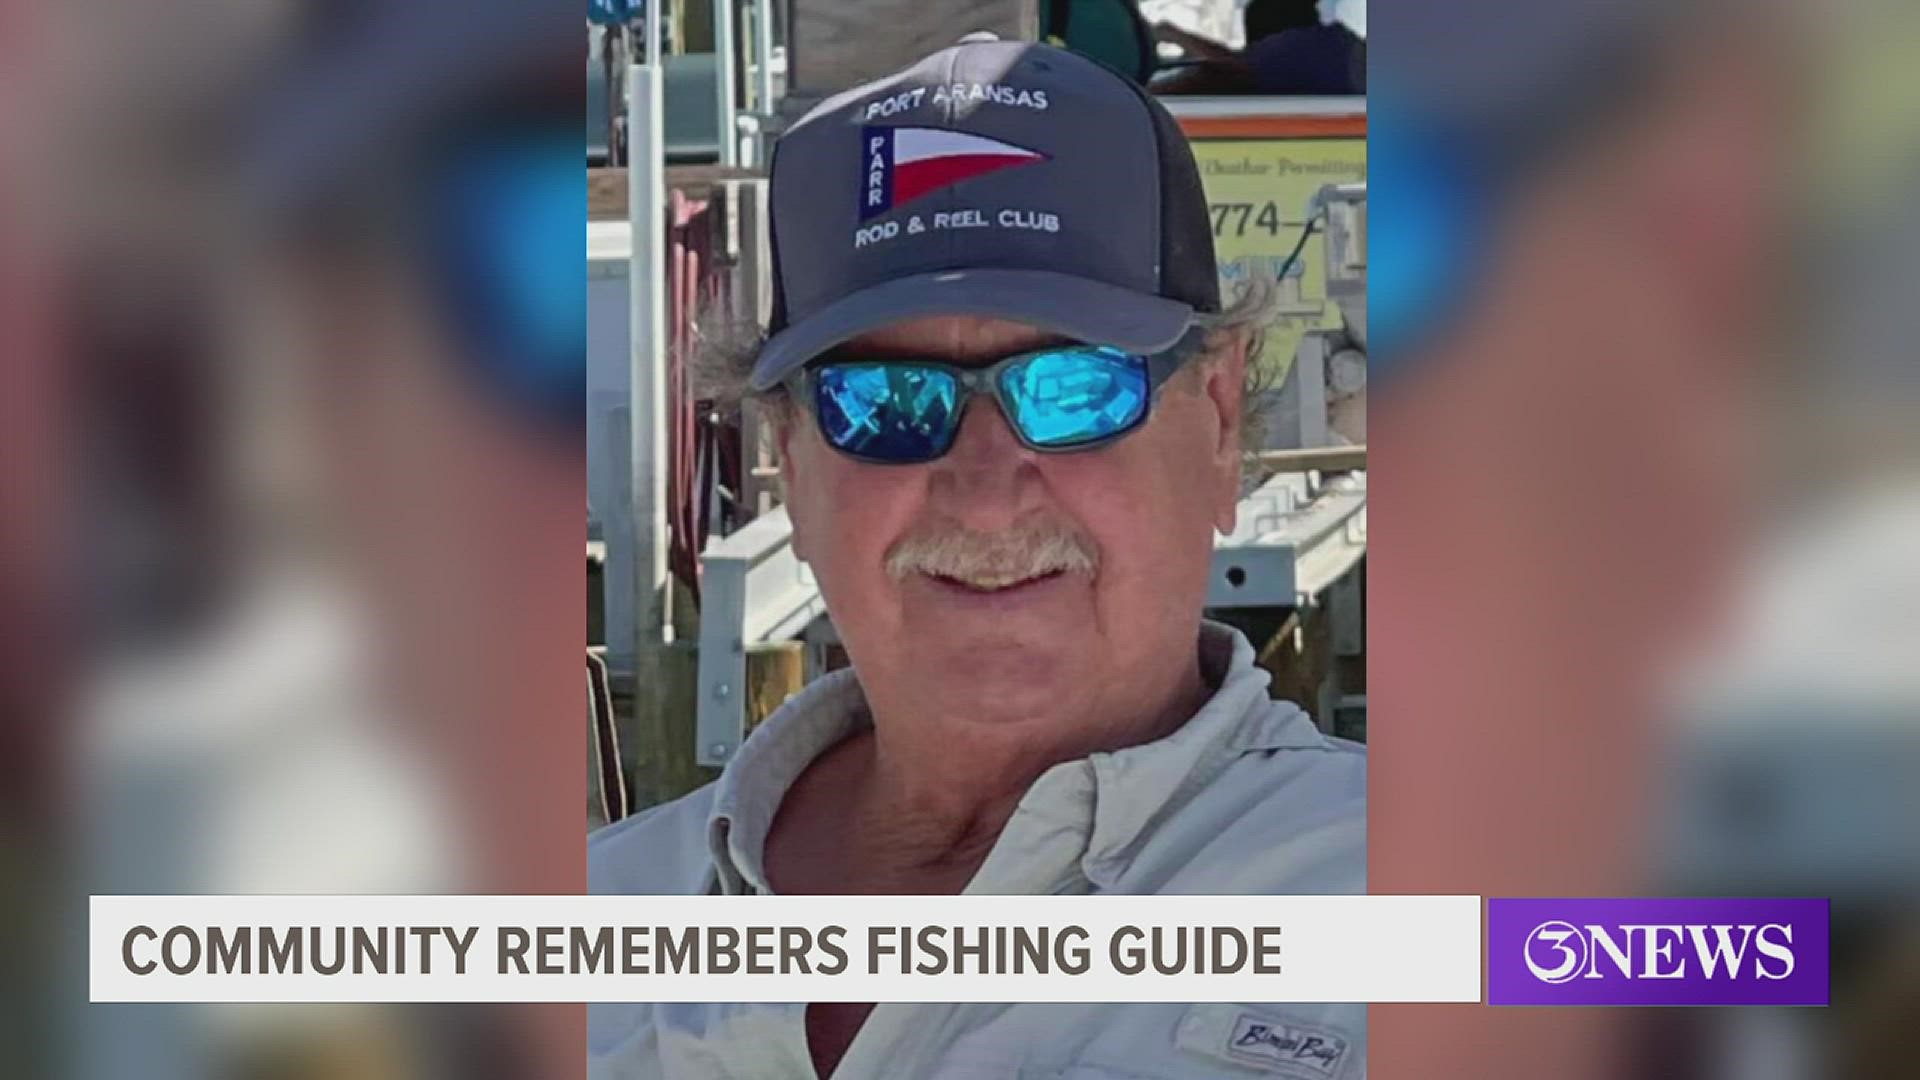 The fishing community of Port Aransas is remembering a beloved fishing guide that was killed over the weekend in a tragic boating accident.